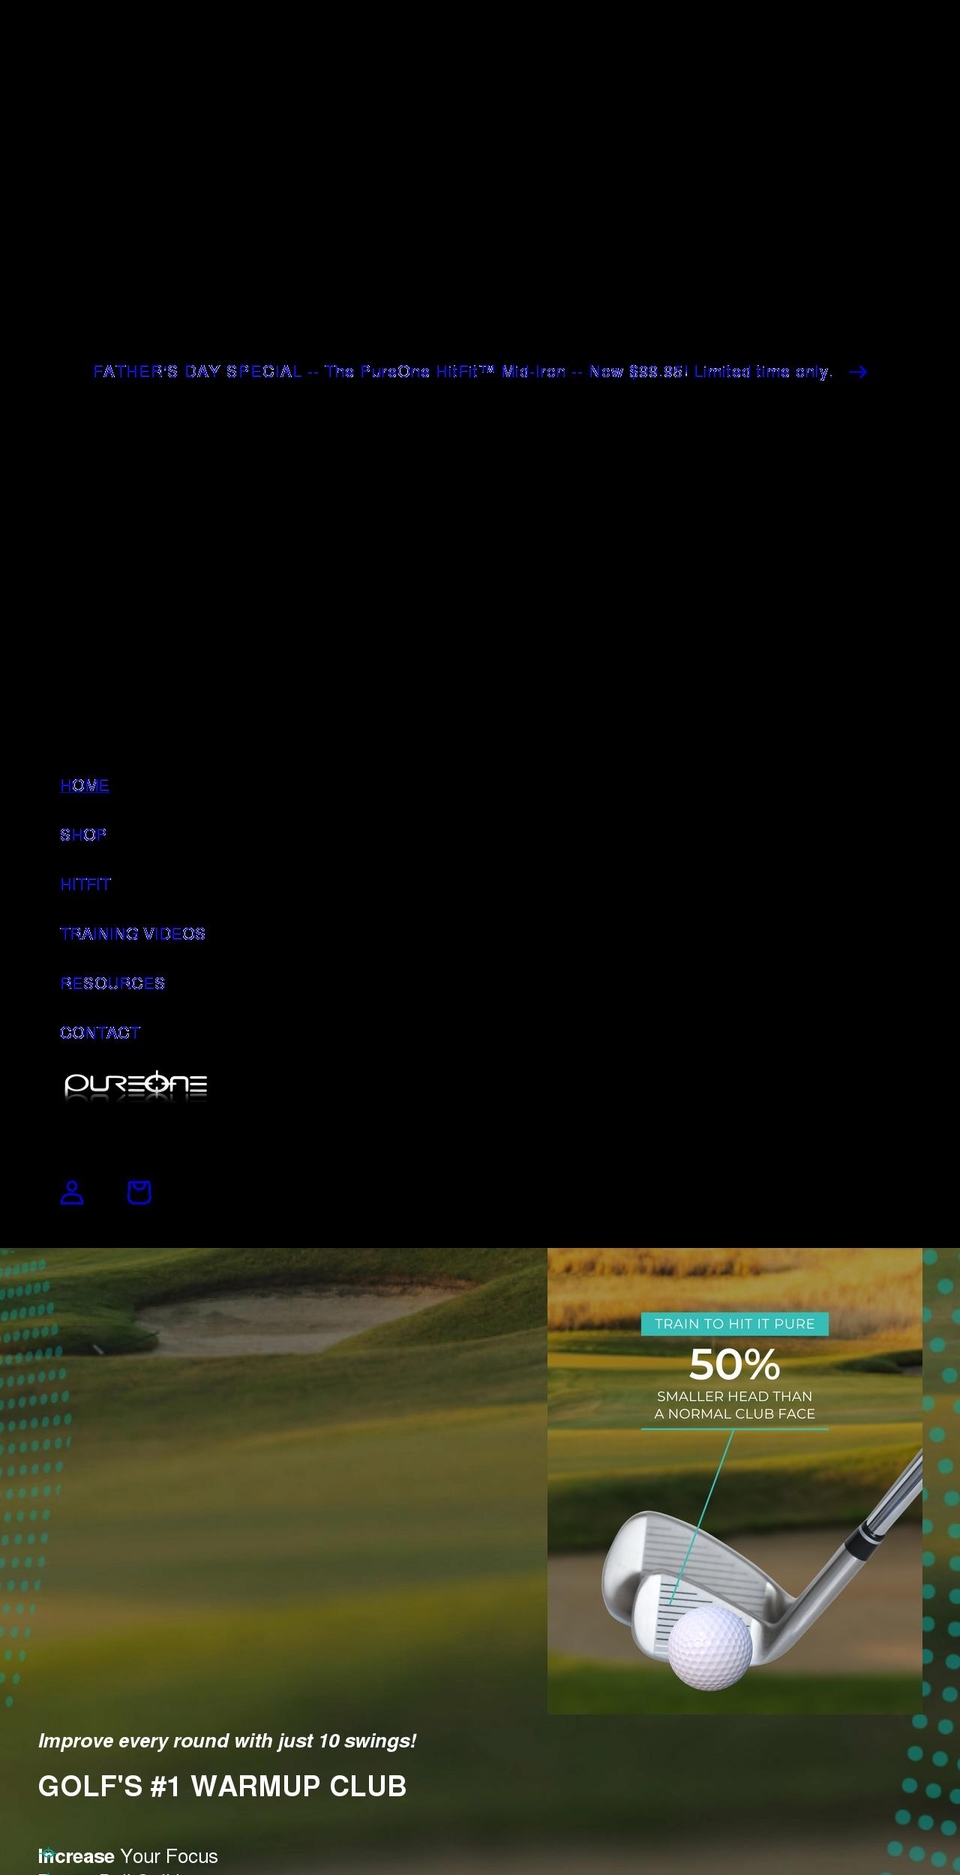 Ride with Installments message Shopify theme site example pureonegolf.com